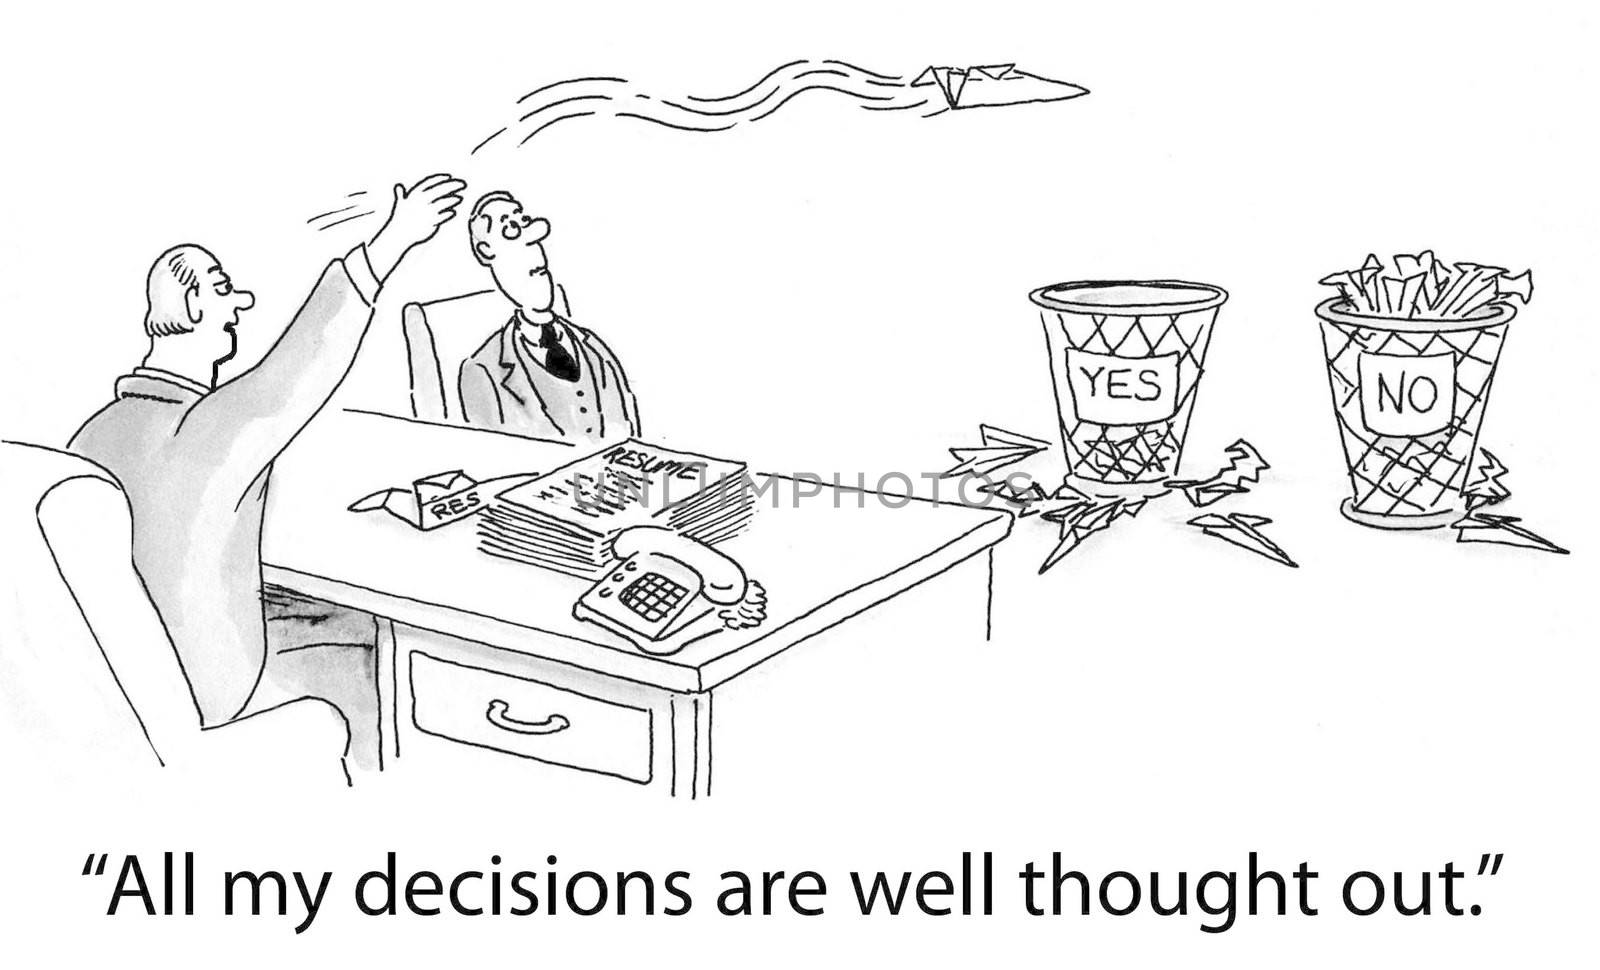 "All my decisions are well thought out."  (Yes and No buckets)